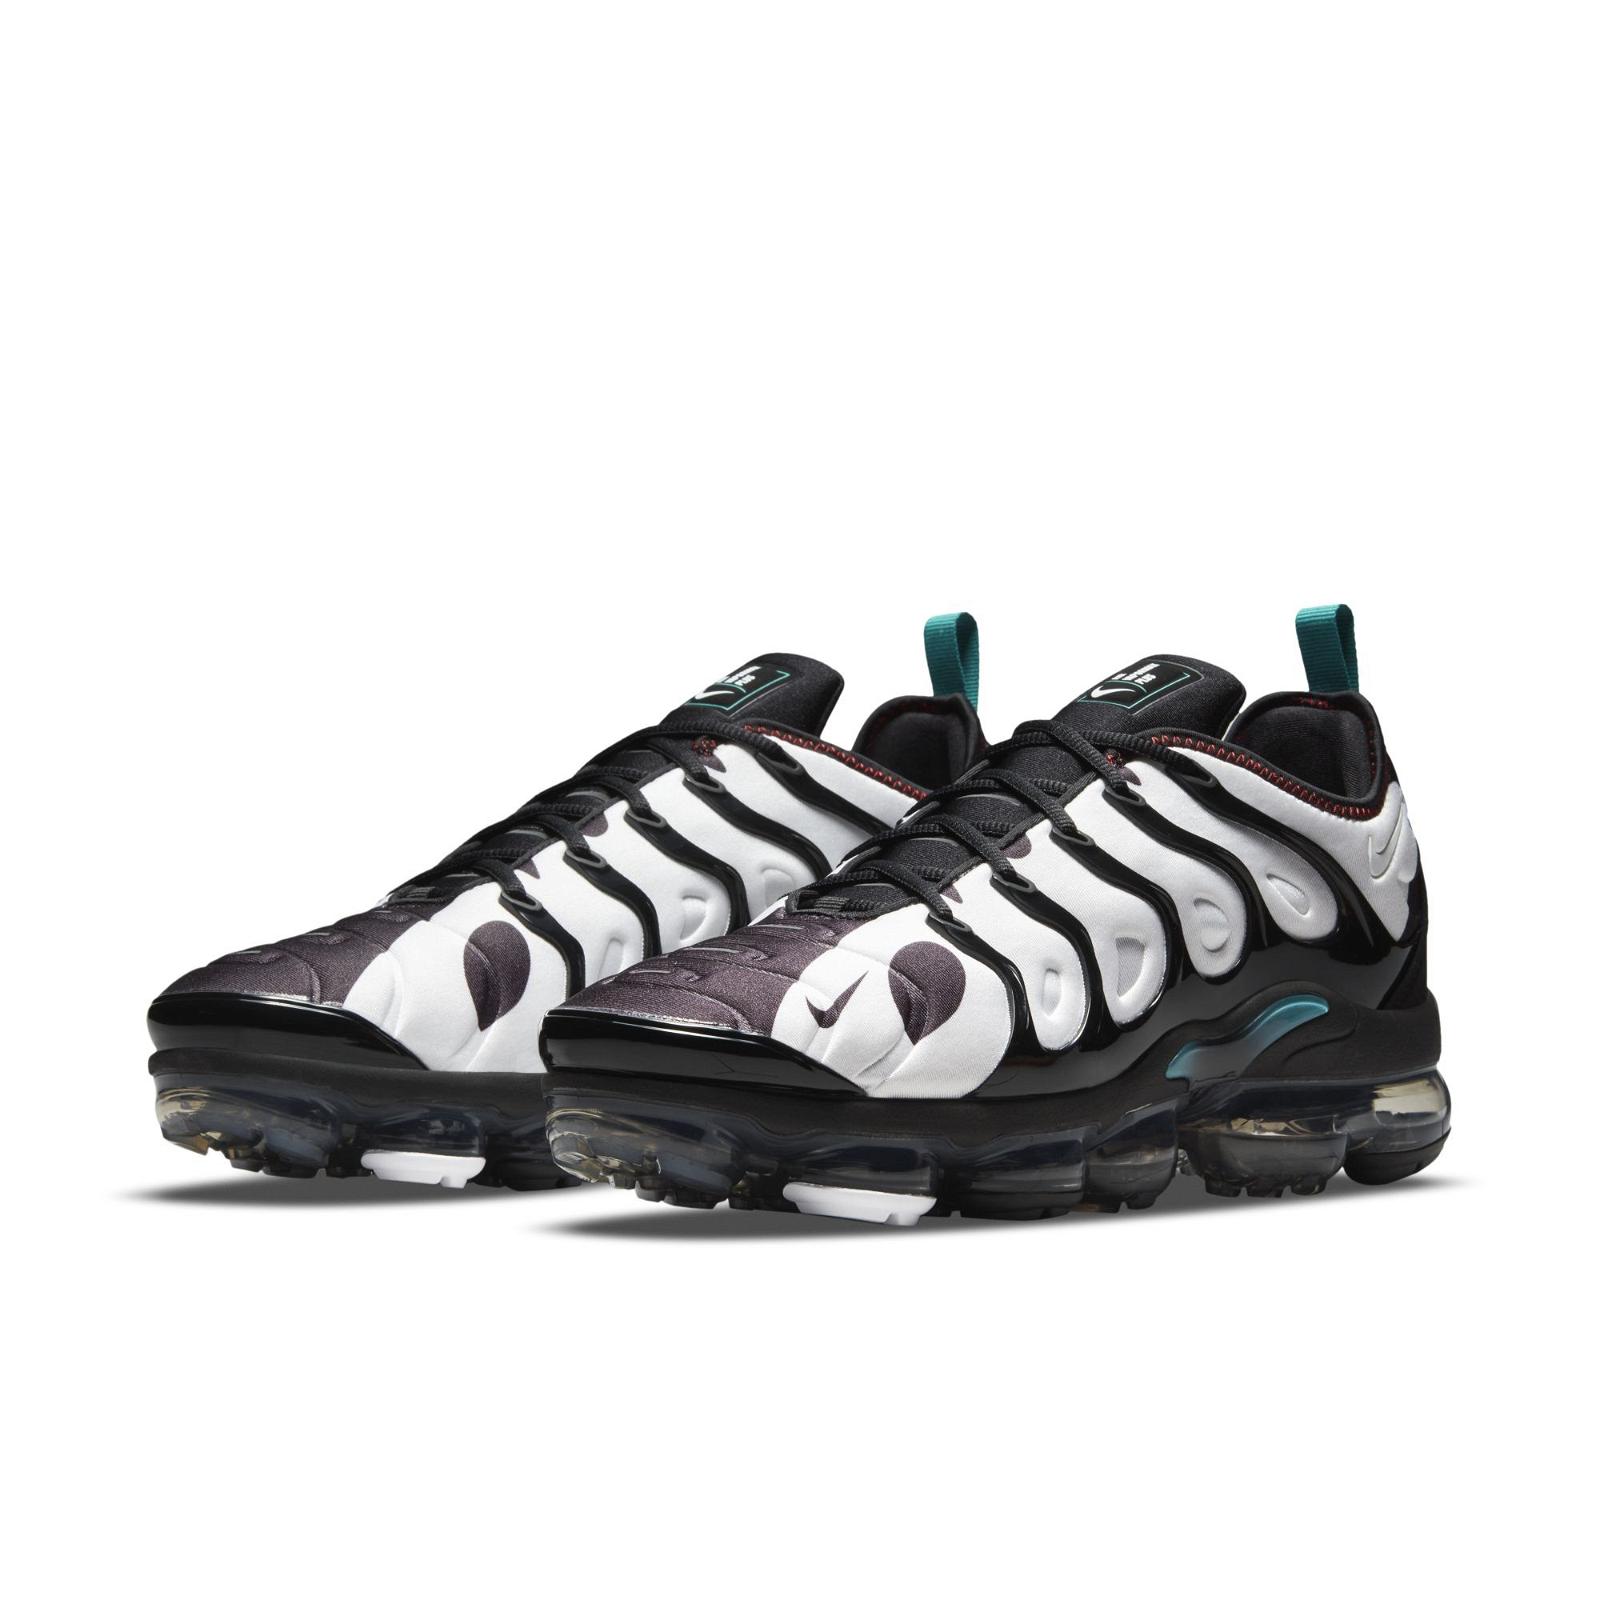 Nike Celebrates 25th Anniversary of Air Griffey Max With Sweetest Swing ...